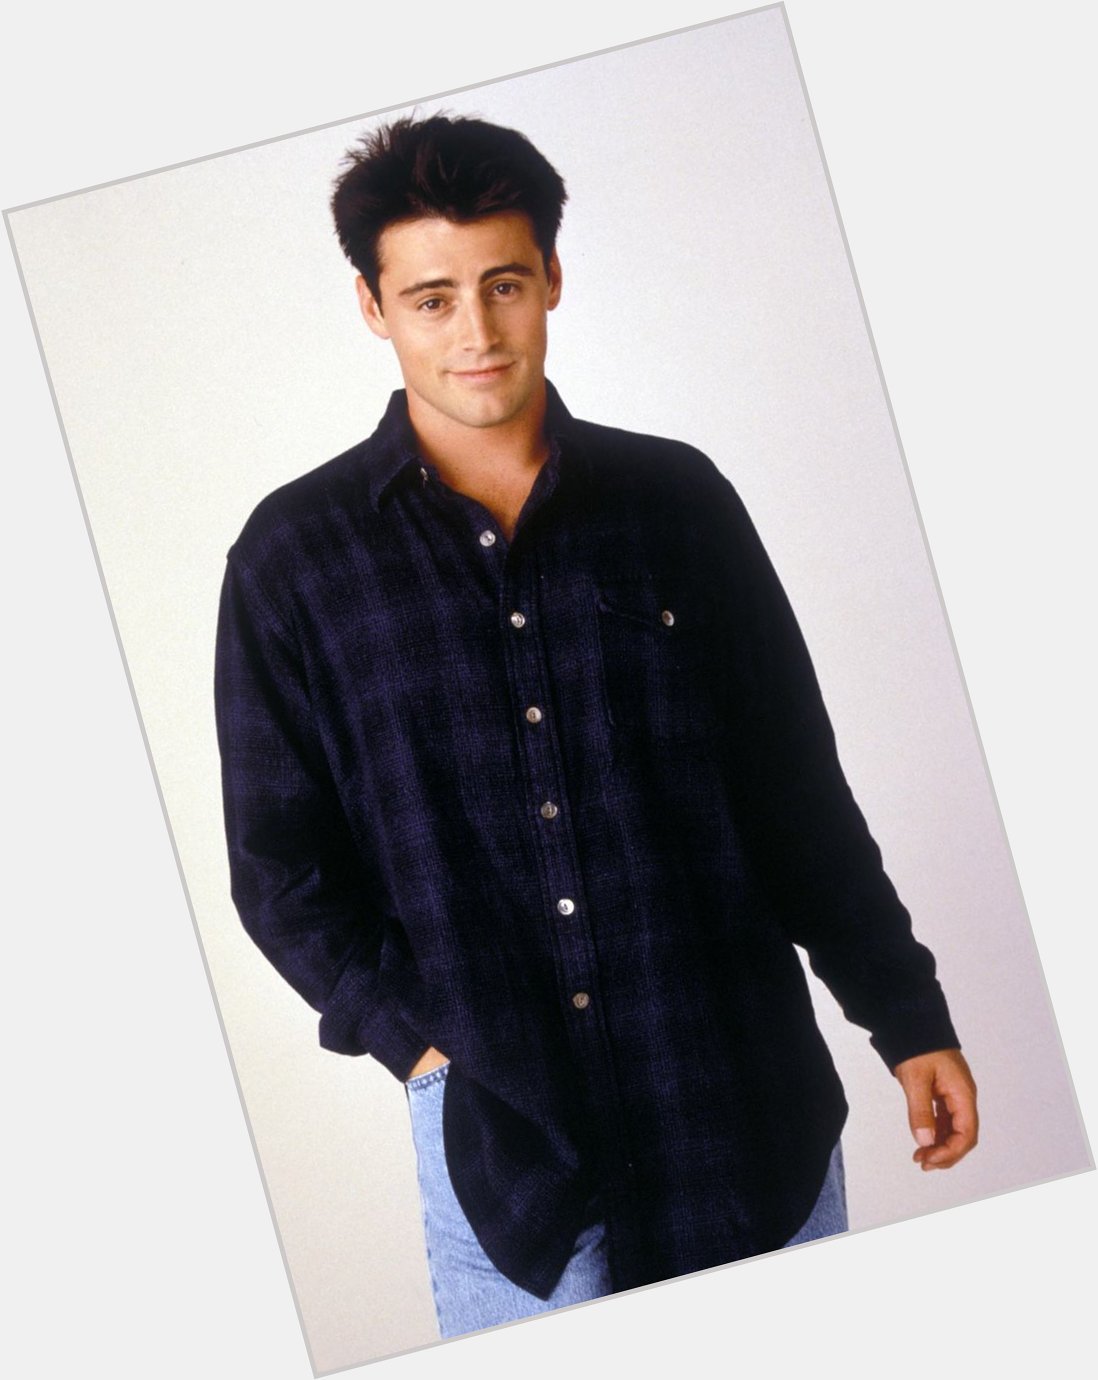 Happy birthday to \"Friends,\" \"Lost In Space\" and \"Joey\" star, Matt Leblanc, born on this date, July 25, 1967. 